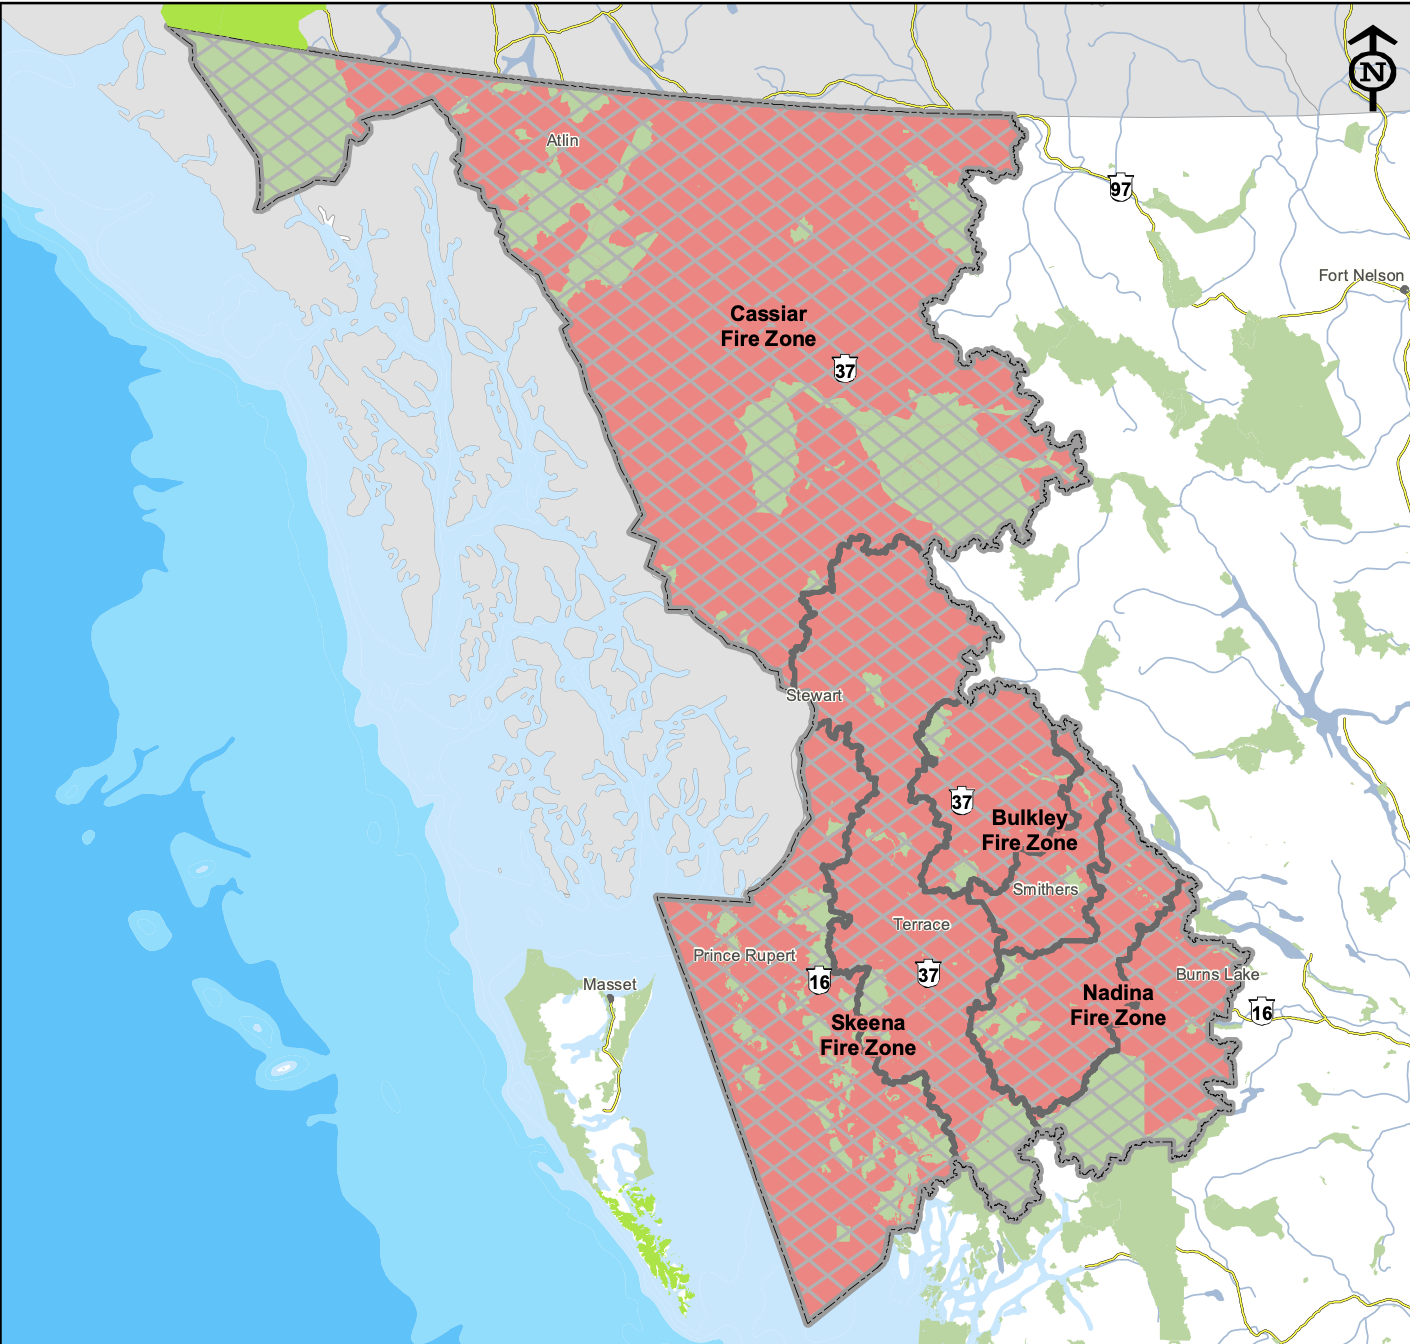 North Coast Review: Northwest Fire Bans in effect including Prince